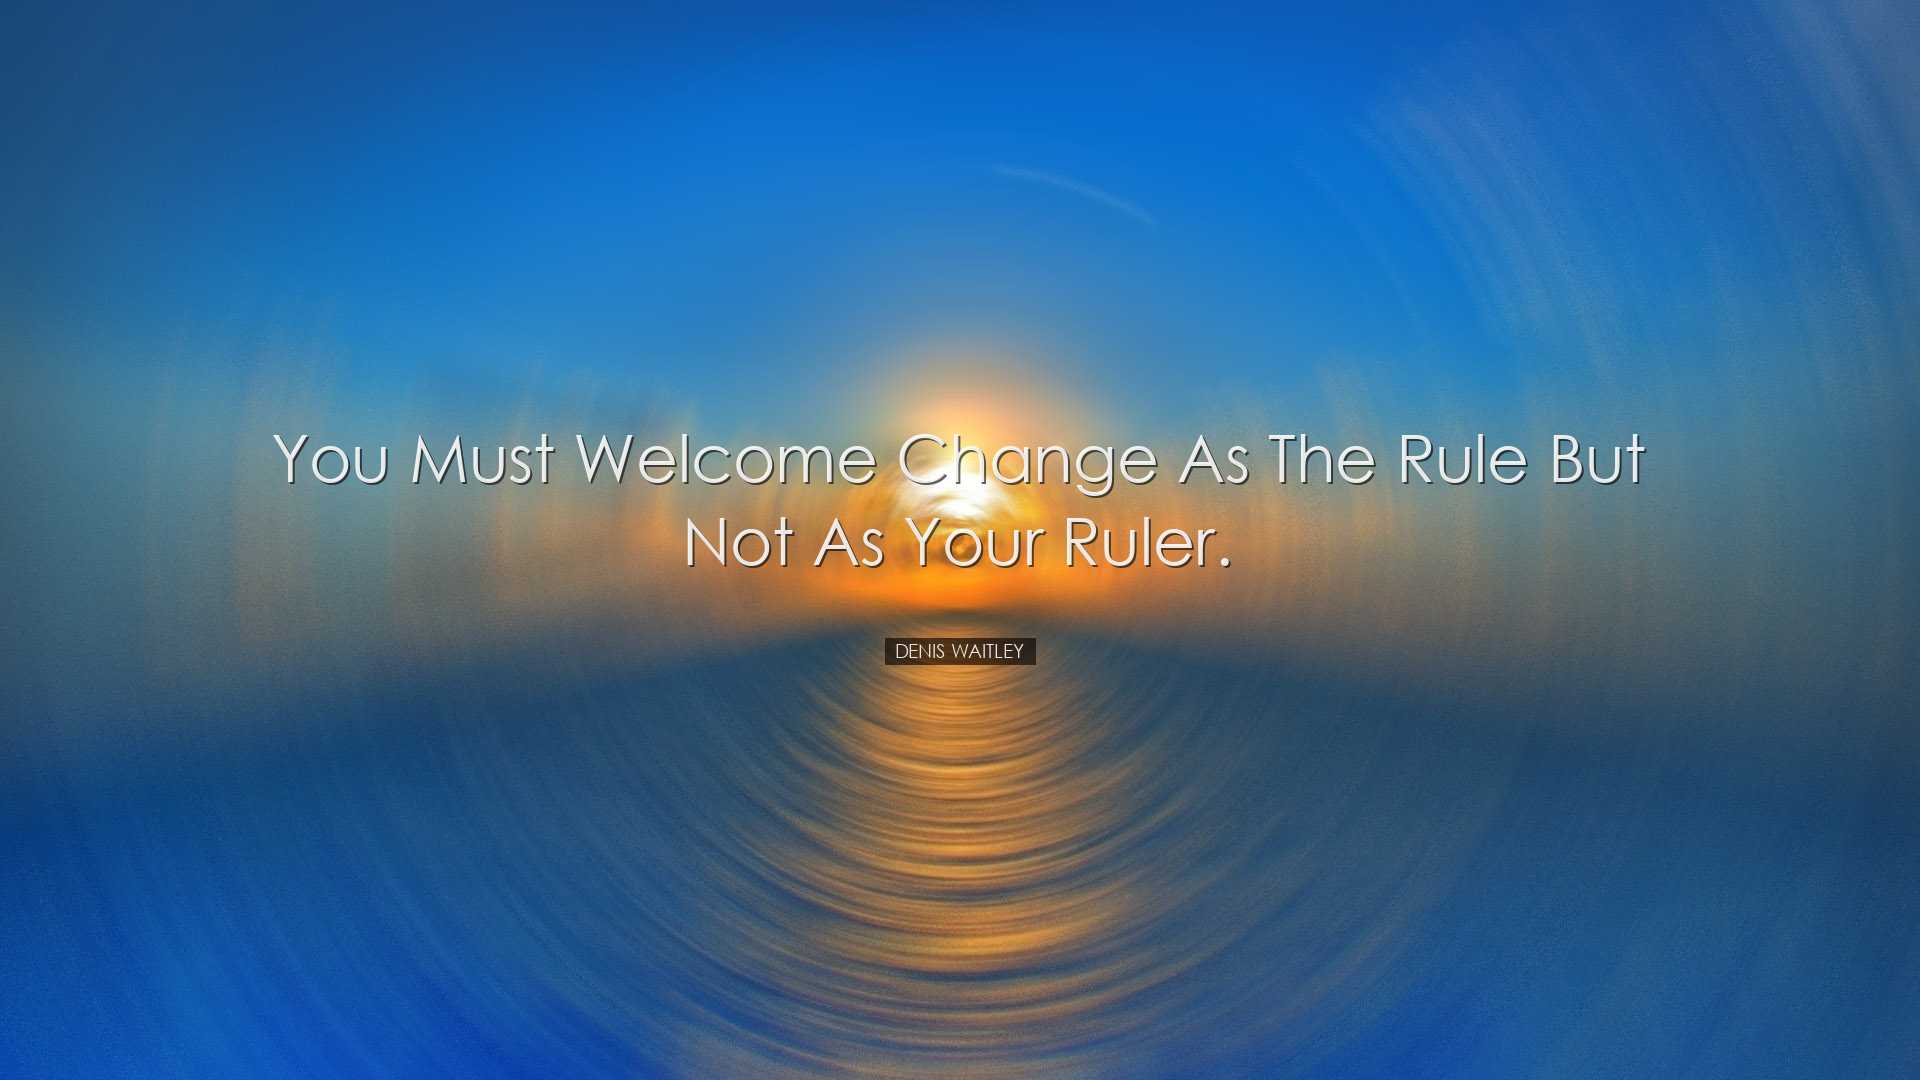 You must welcome change as the rule but not as your ruler. - Denis